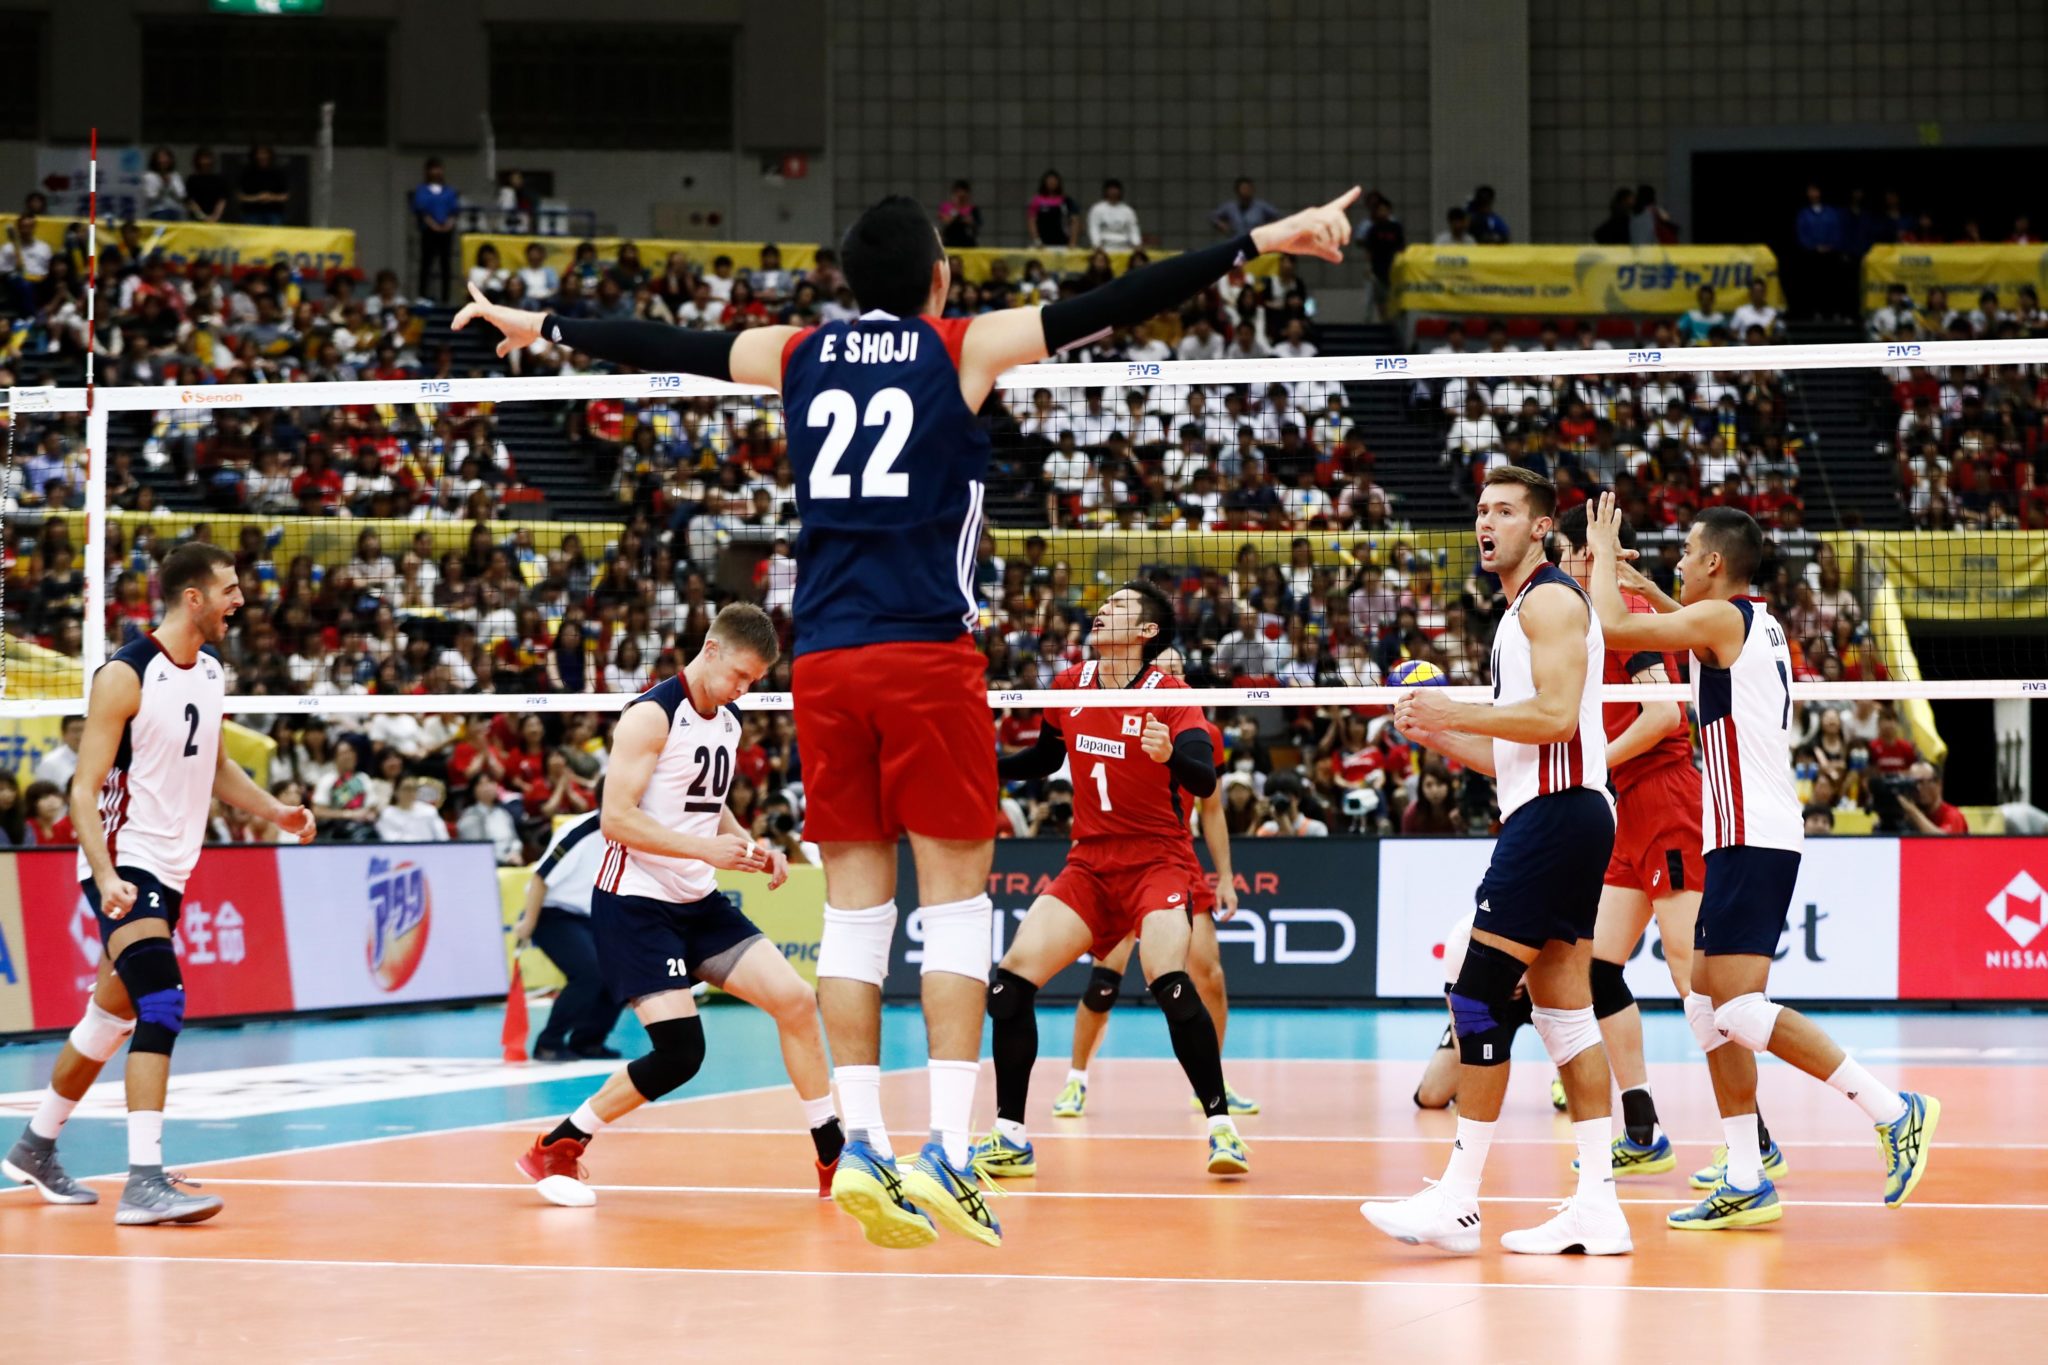 WATCH LIVE: Team USA Fights For Spot In Semis Against Costa Rica